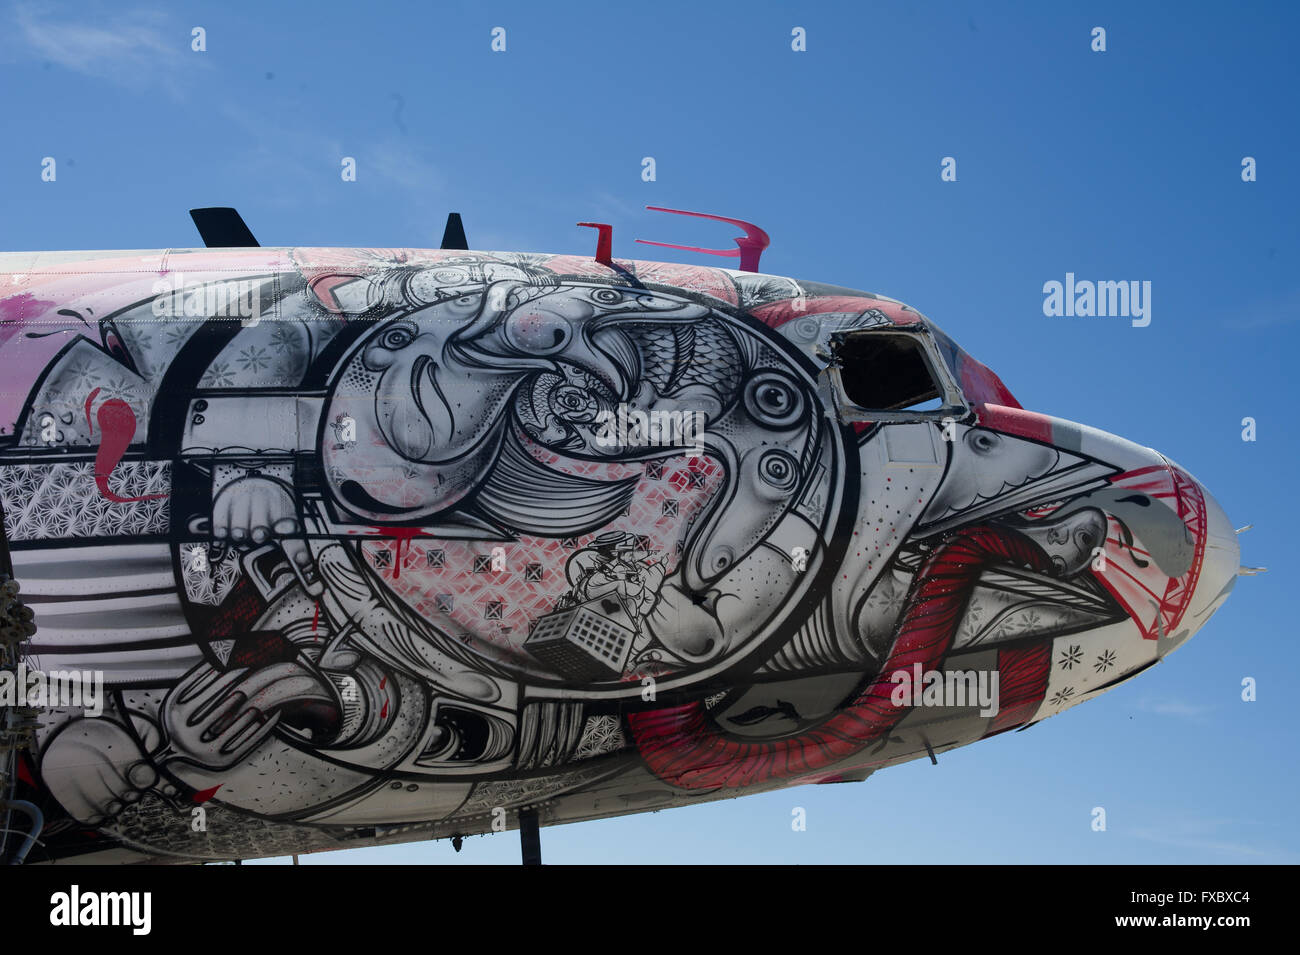 Art on airplanes Stock Photo